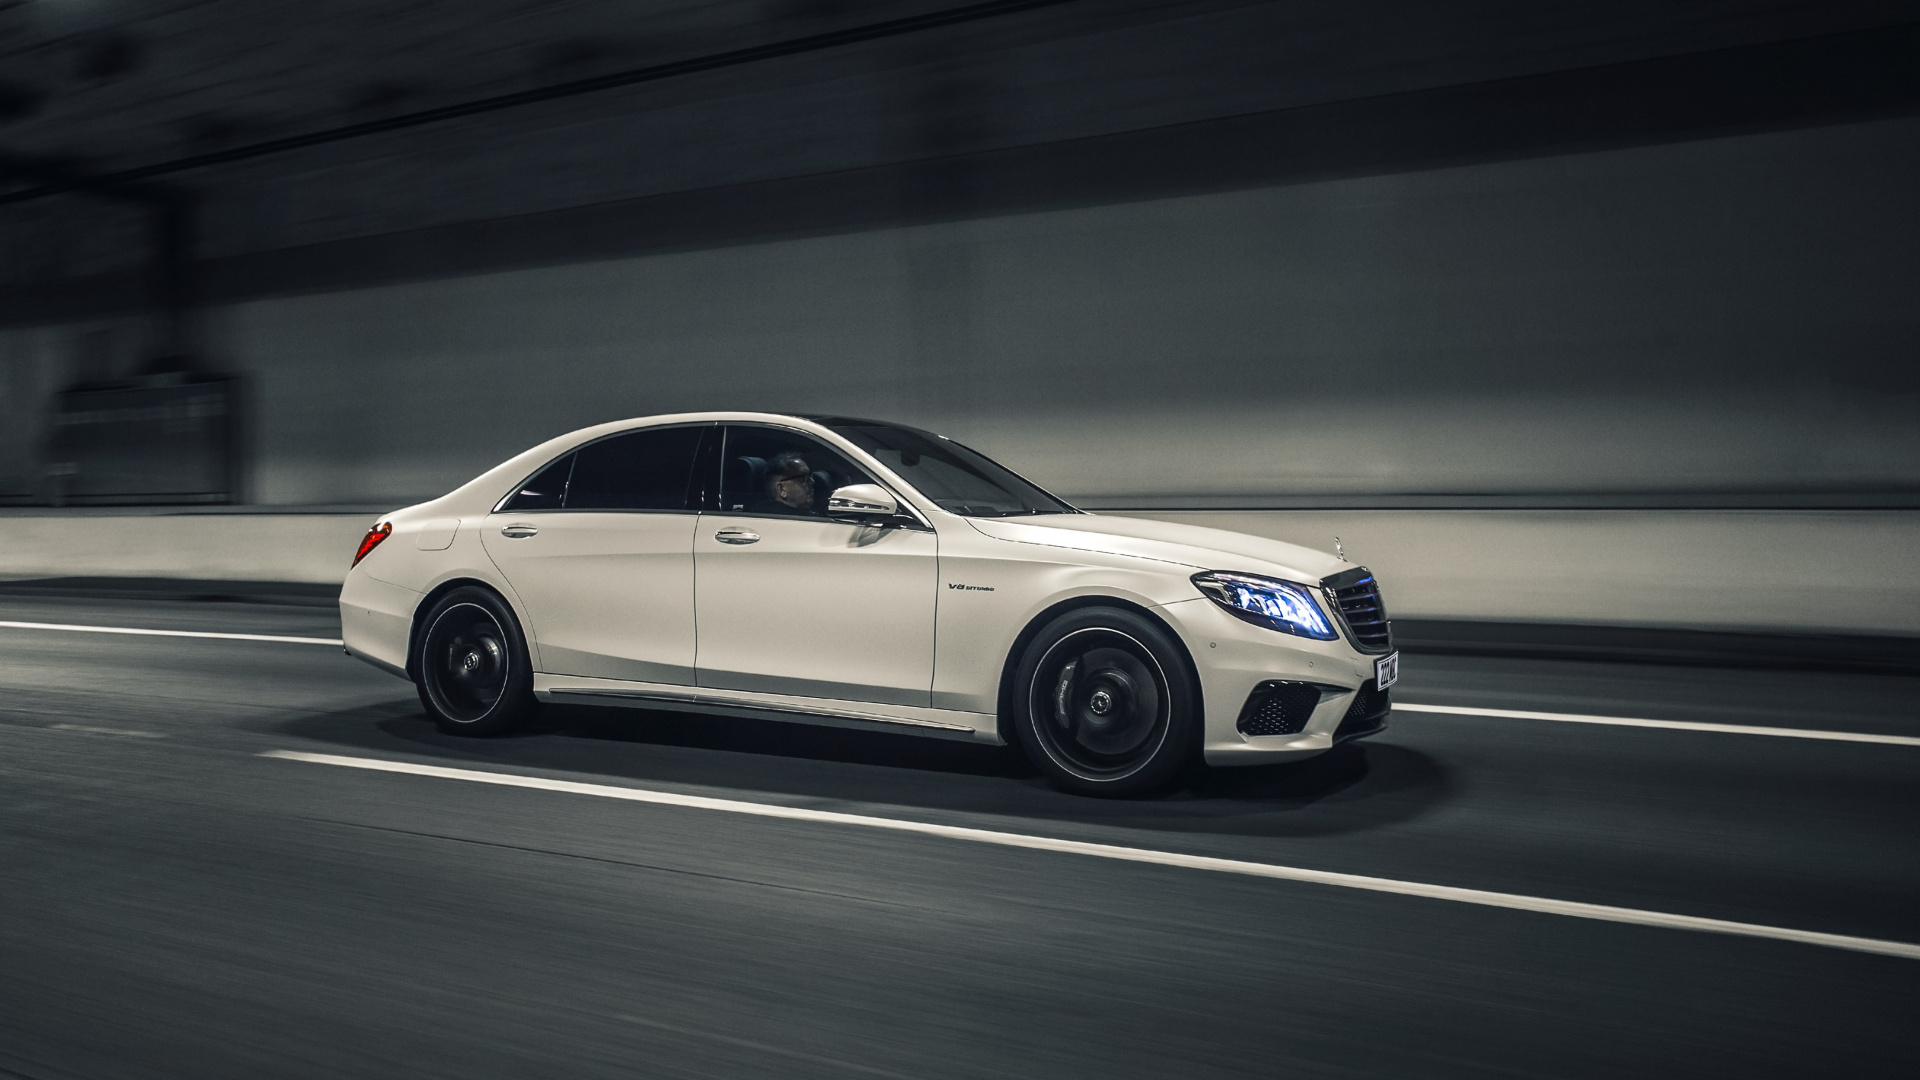 White Mercedes Benz Coupe on Road. Wallpaper in 1920x1080 Resolution